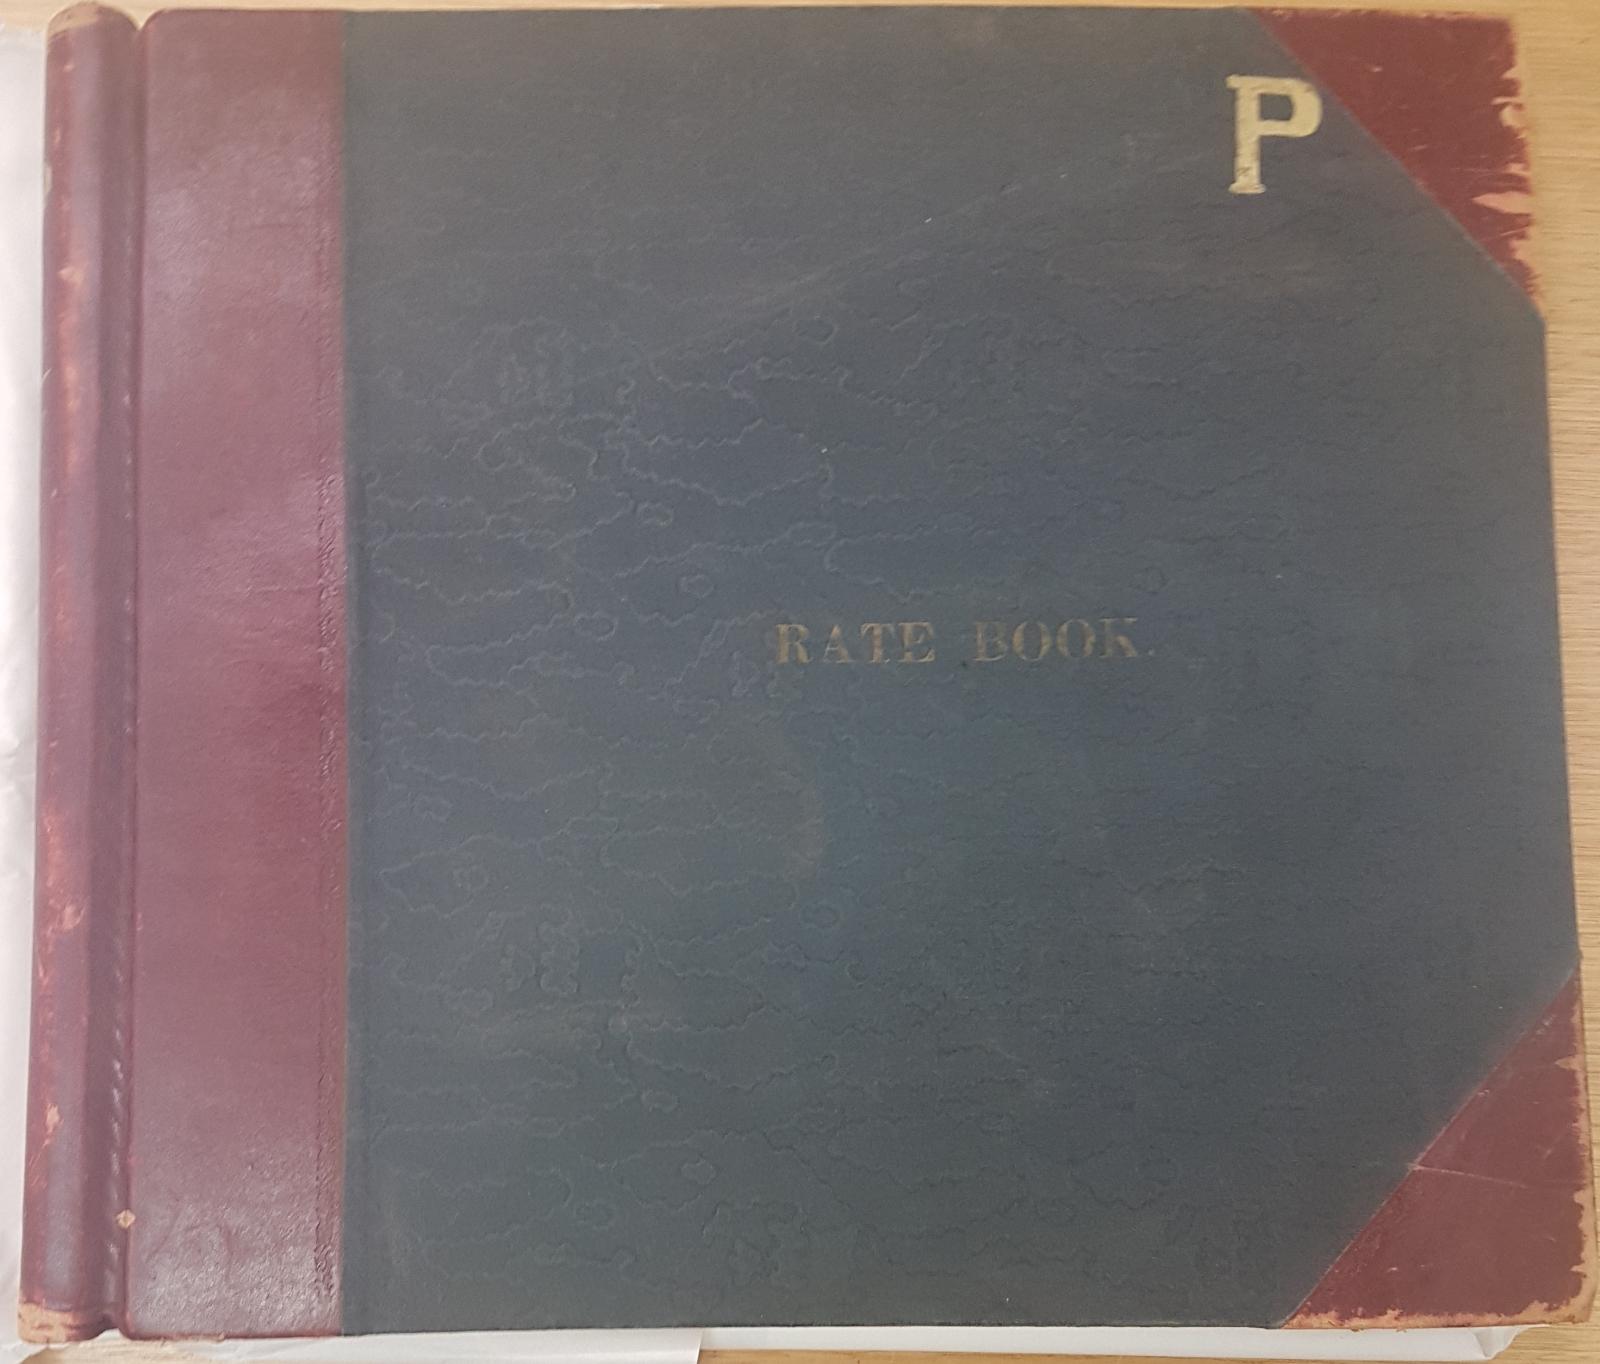 rate book